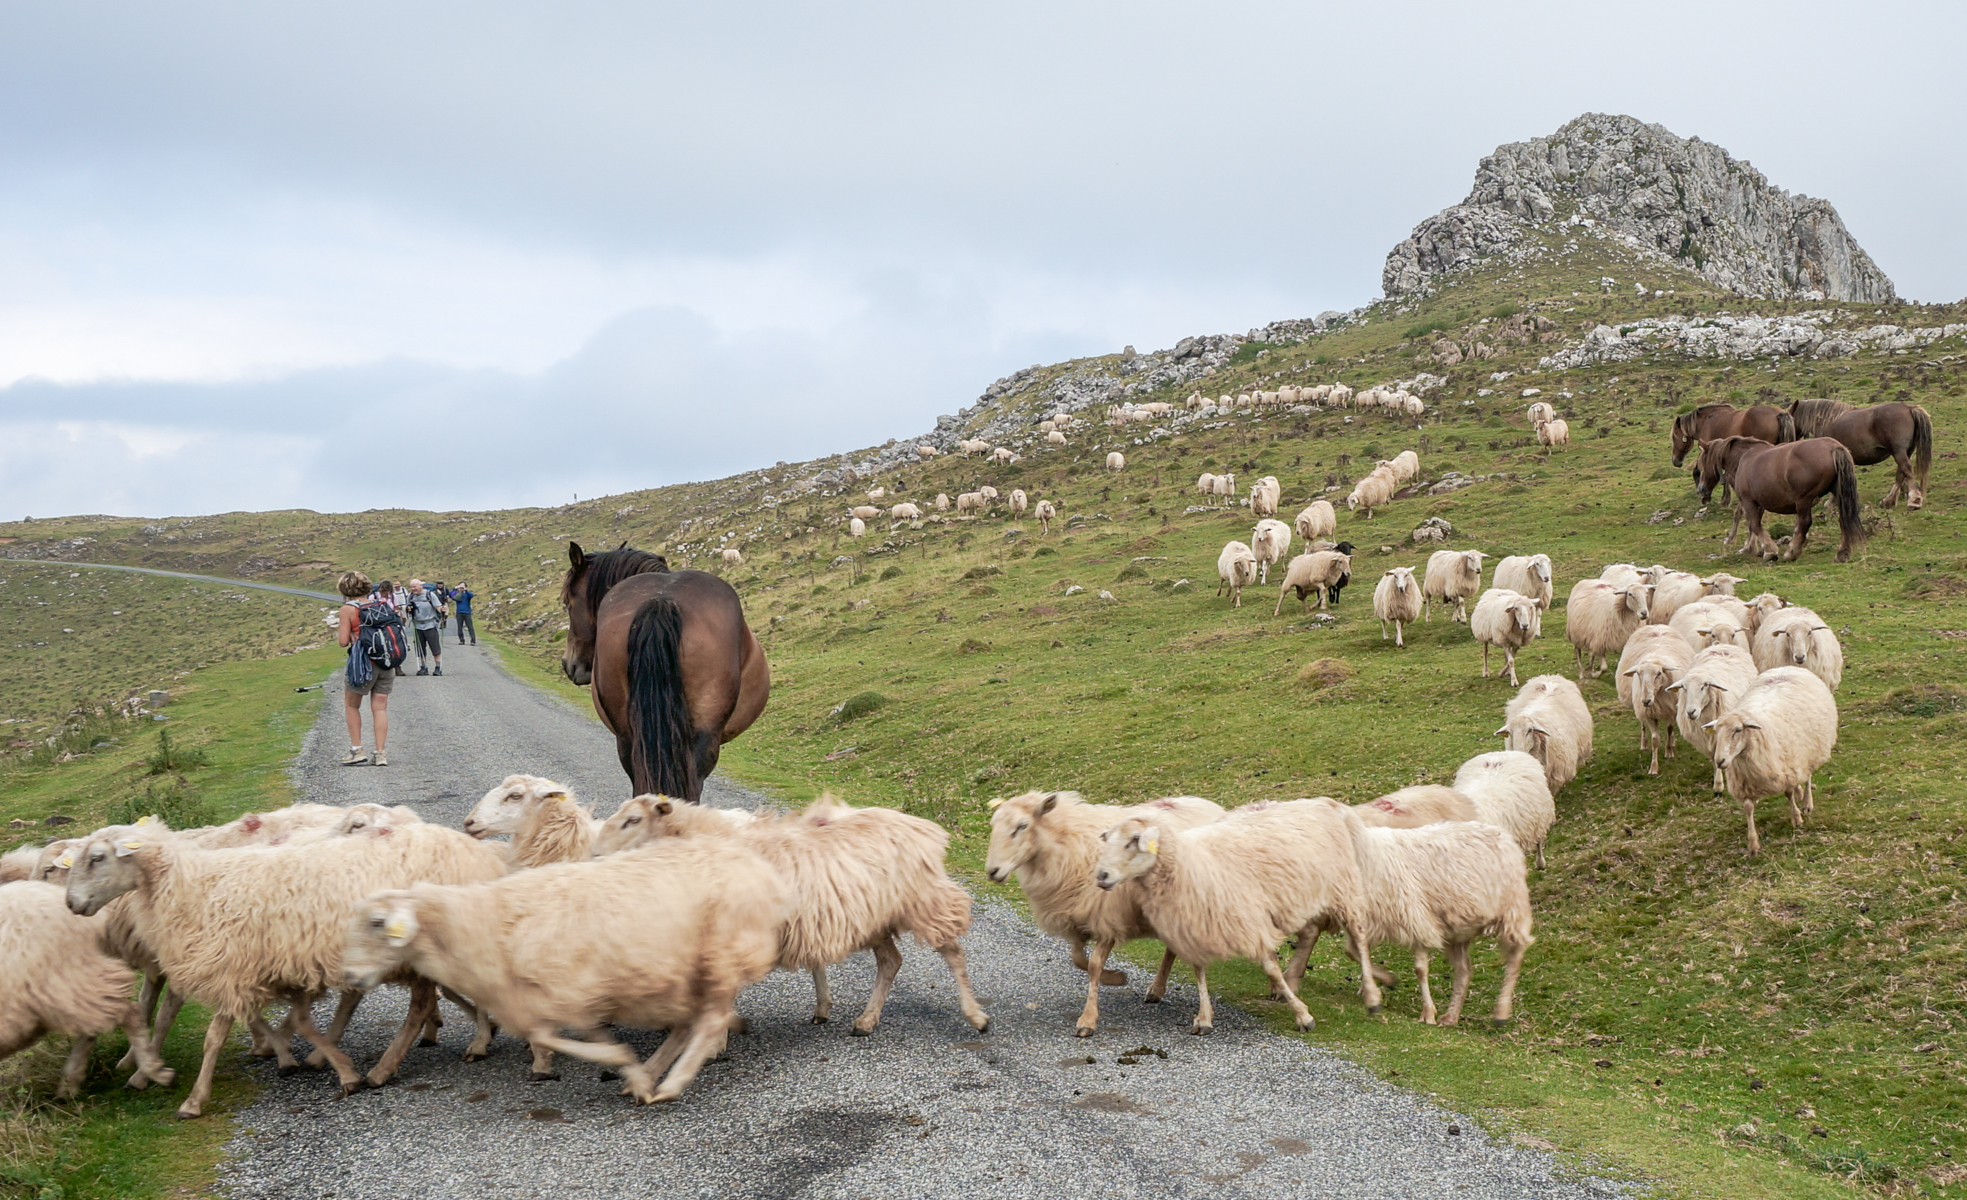 Pilgrims and domesticated sheep on the Camino Frances in the Pyrenees approximately 15.4 km from Saint-Jean-Pied-de-Port | Photo by Mike Hudak